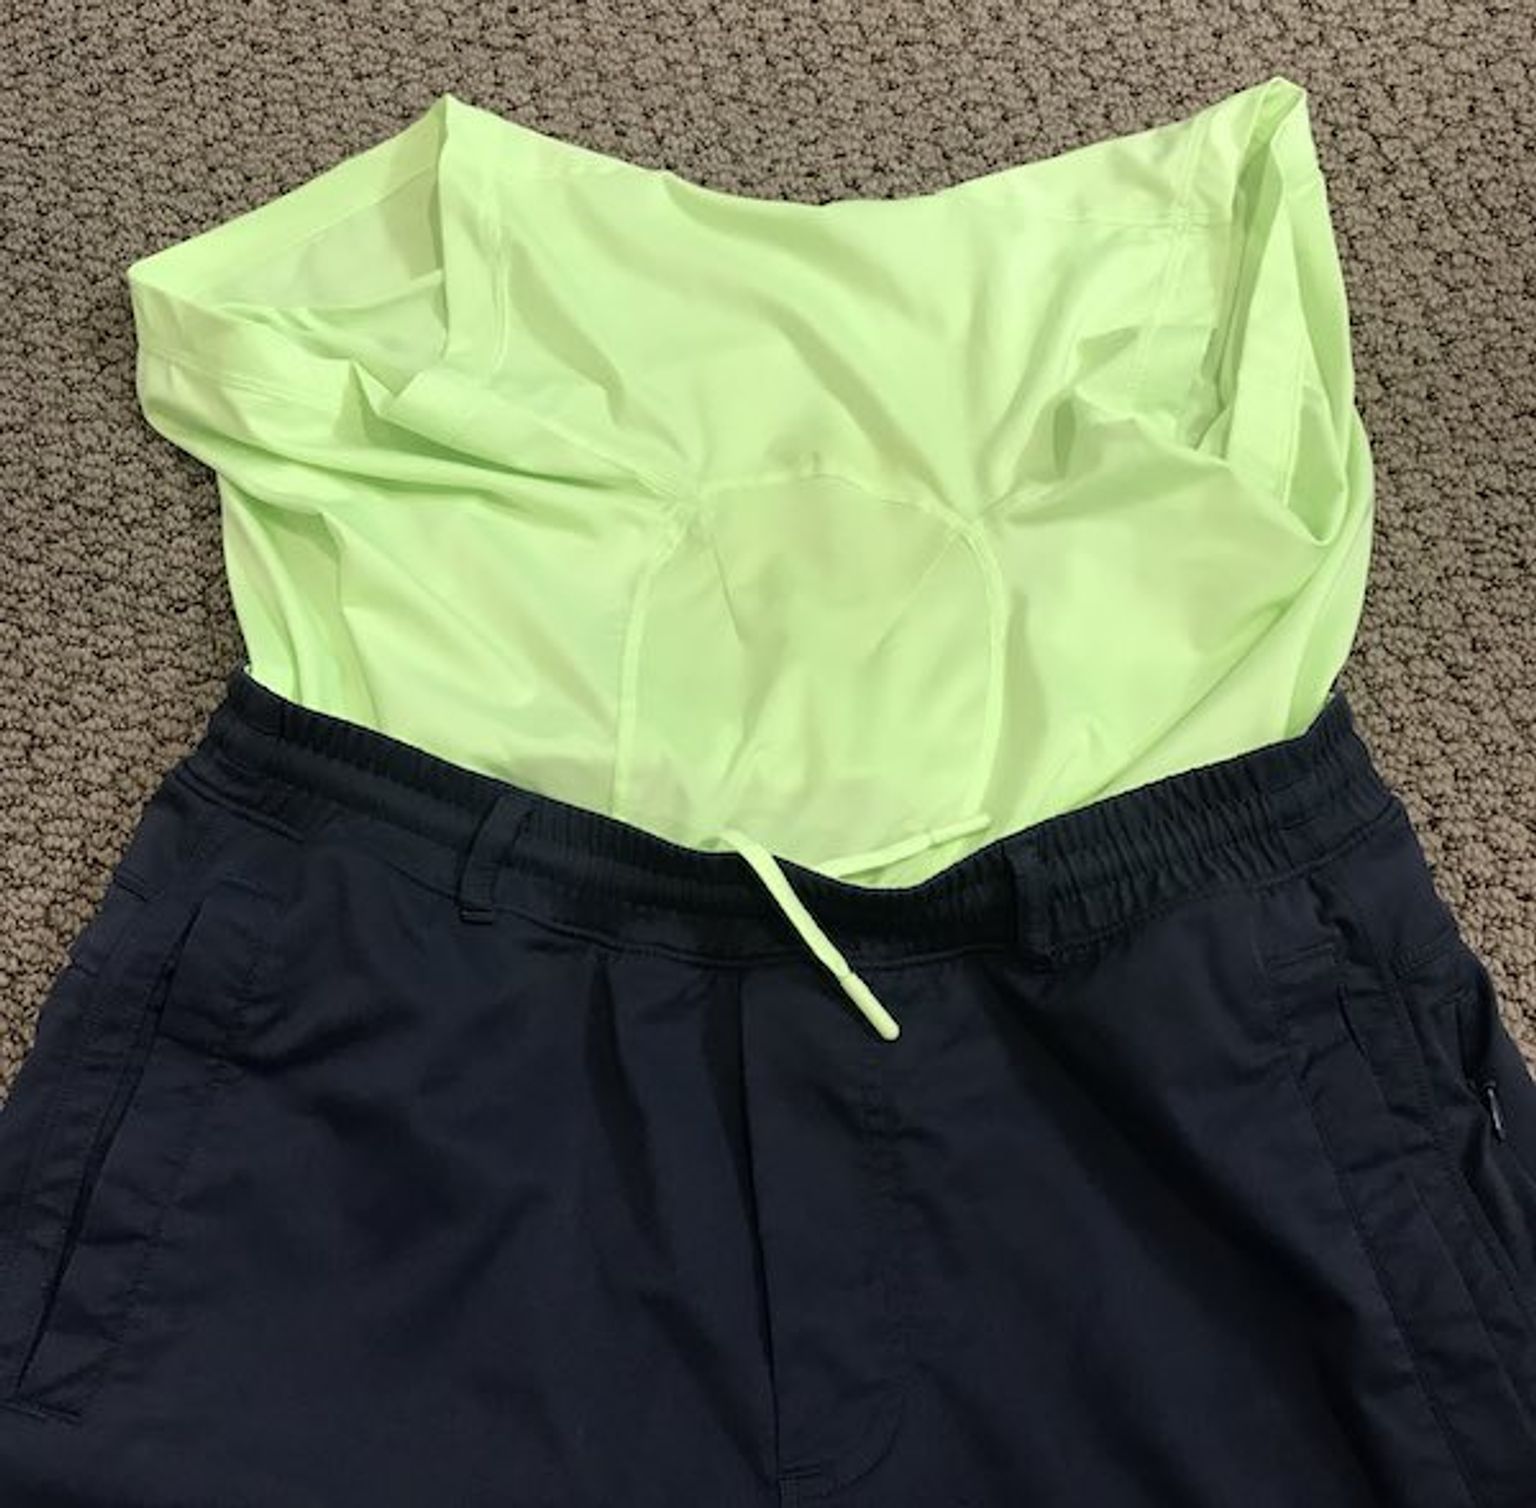 Birddogs Shorts Review: Functional, Versatile, and Comfortable (Even ...